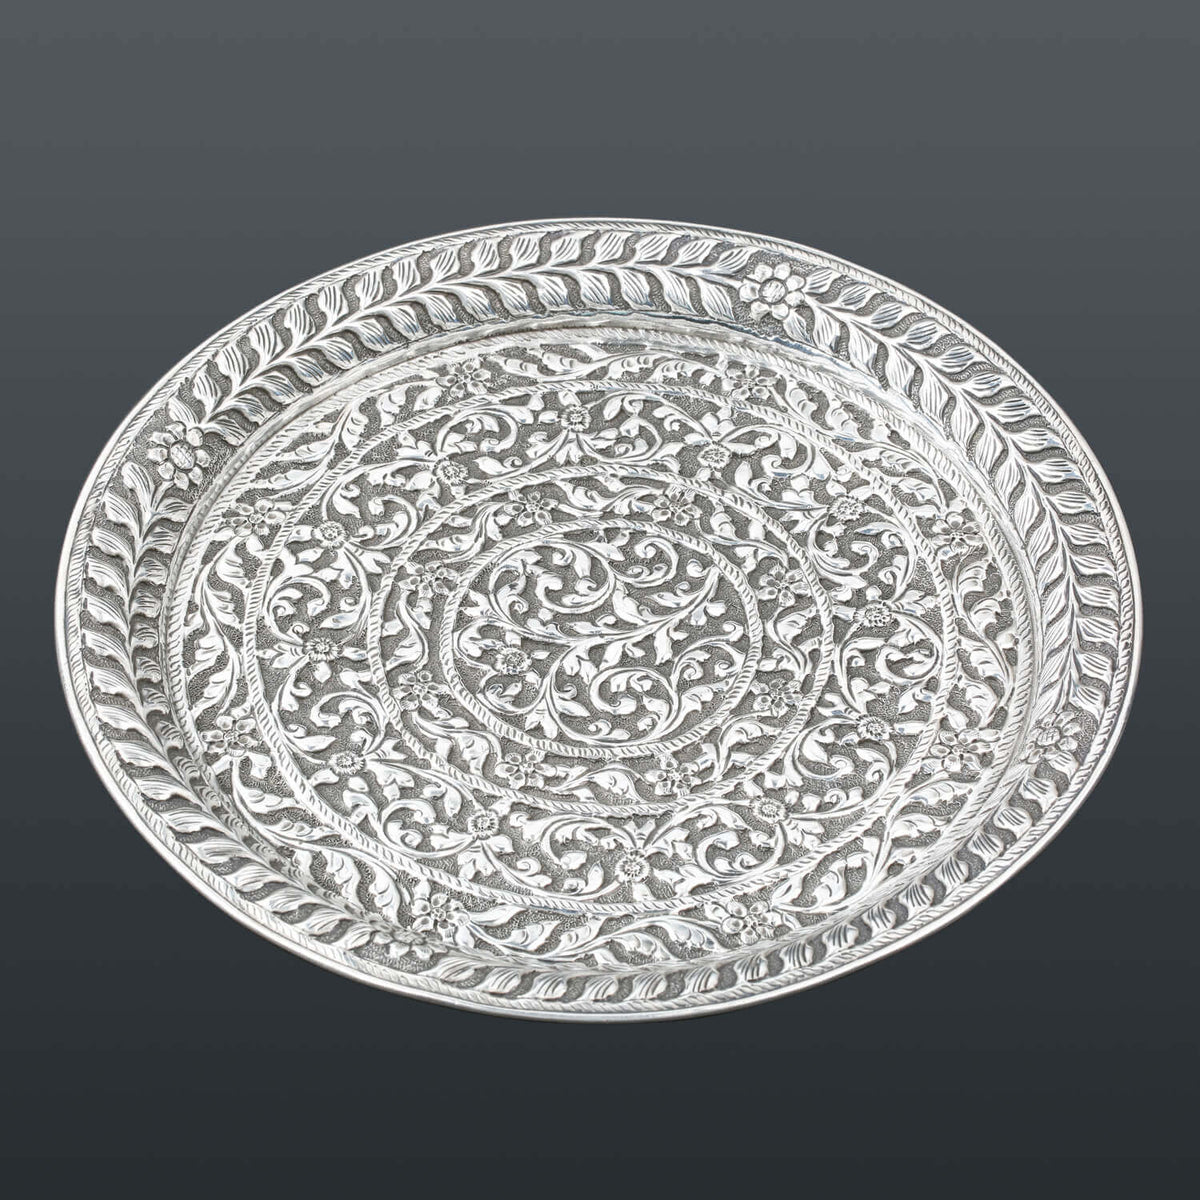 silver plates, sterling silver plates, floral plates, decor, decoration, tableware, handmade, handcrafted, Festival, Showpiece, Gifts, Gifting, Large plate, small plate, silver tray, large tray, small tray, Hand-etched Scrollwork Plate with Plain Rim, Qua